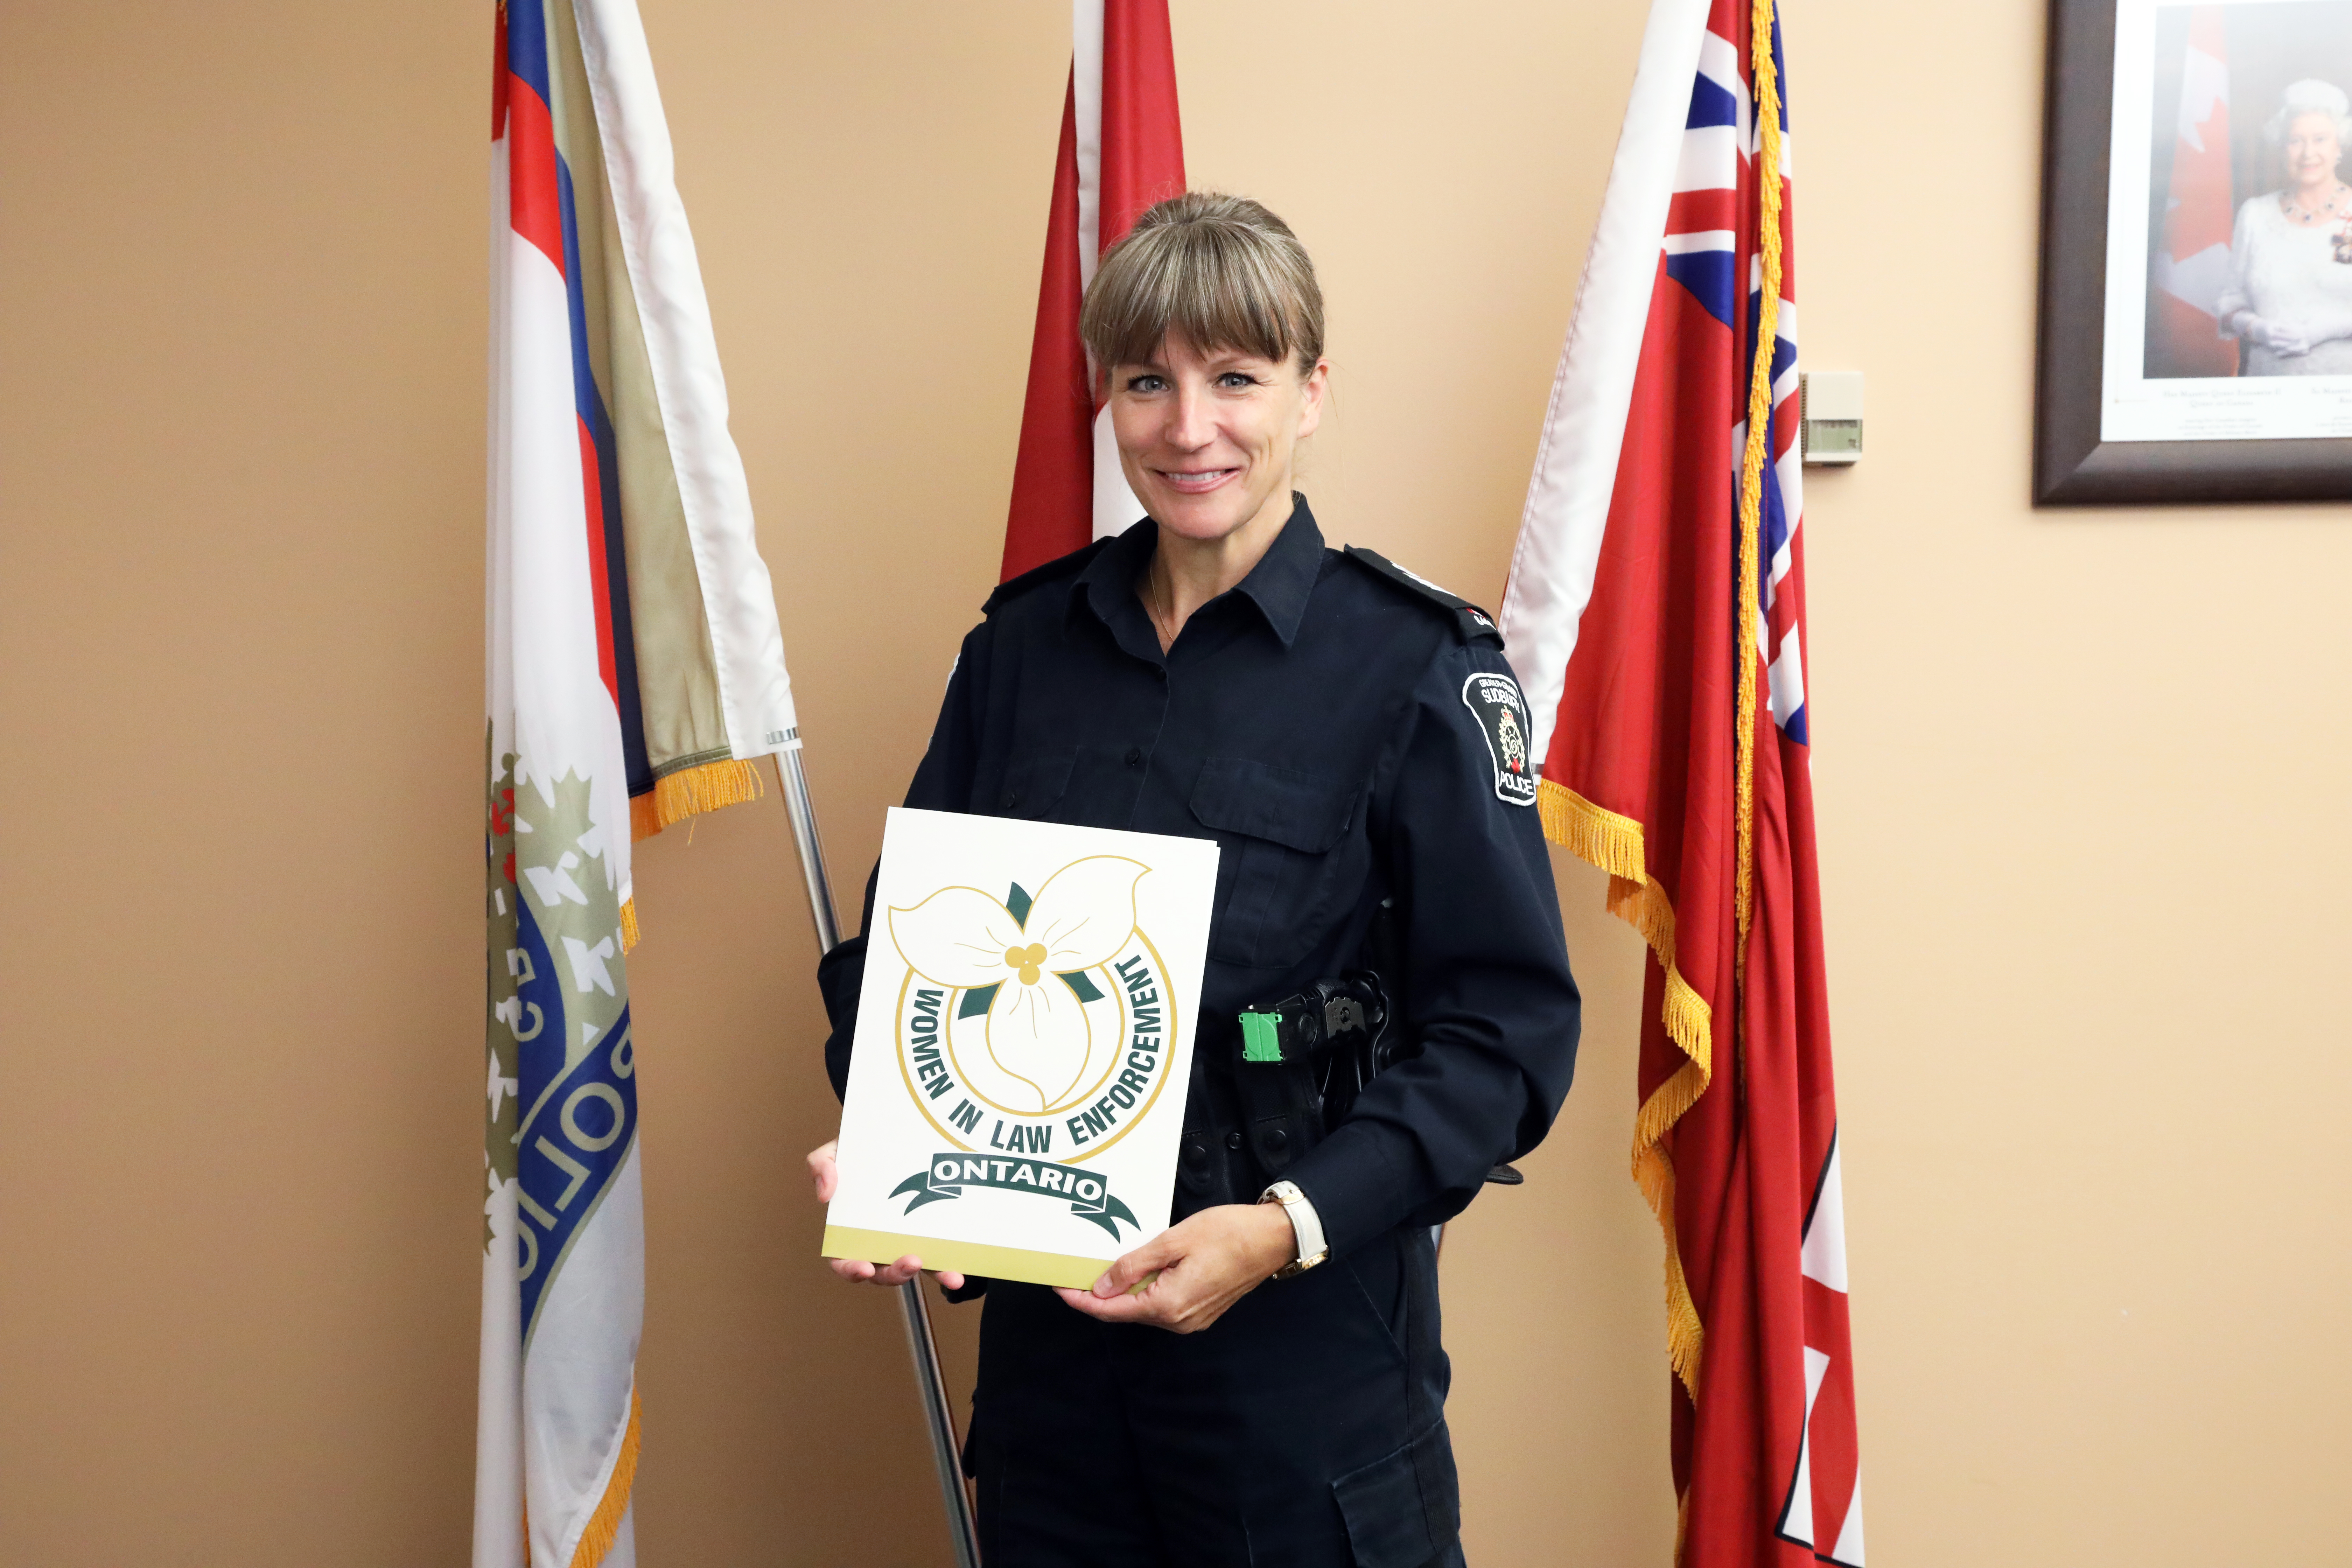 police officer standing in front of flags holding nomination certificate